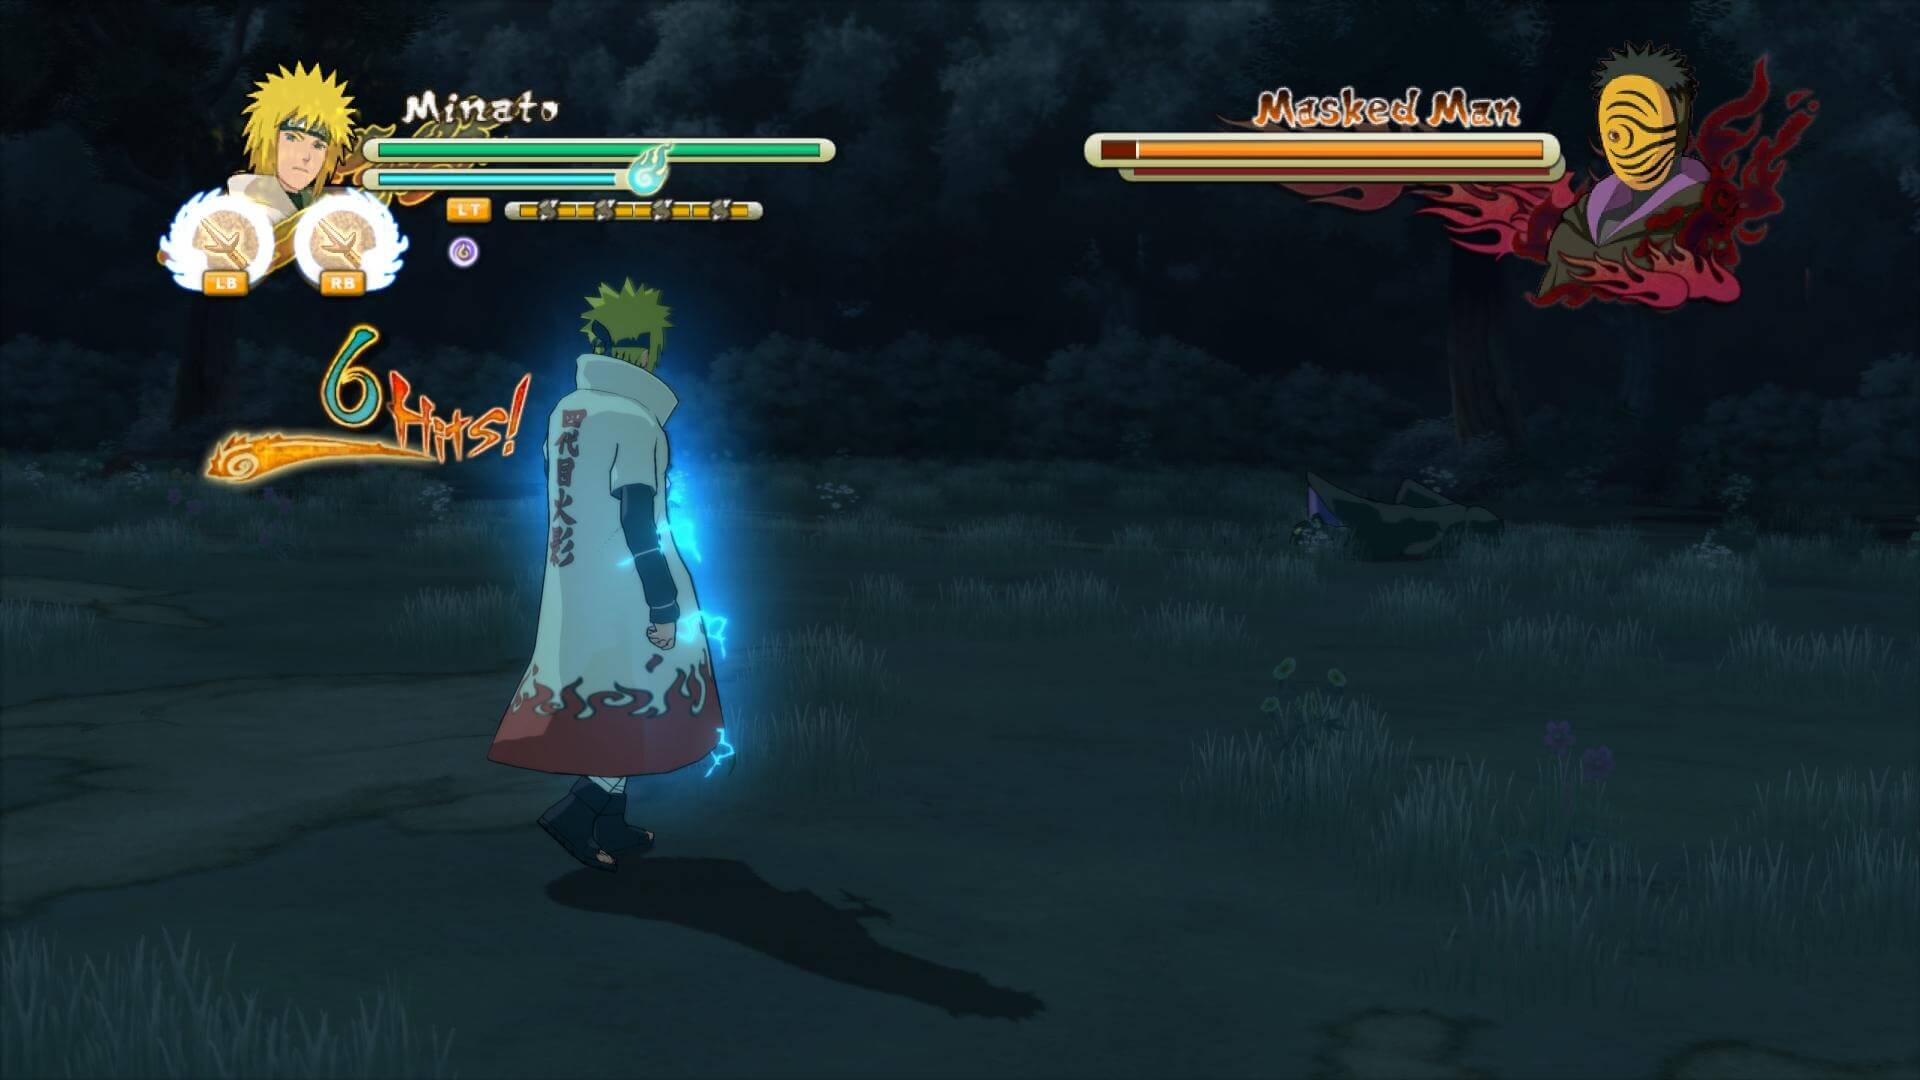 Download game naruto for pc windows 7 free